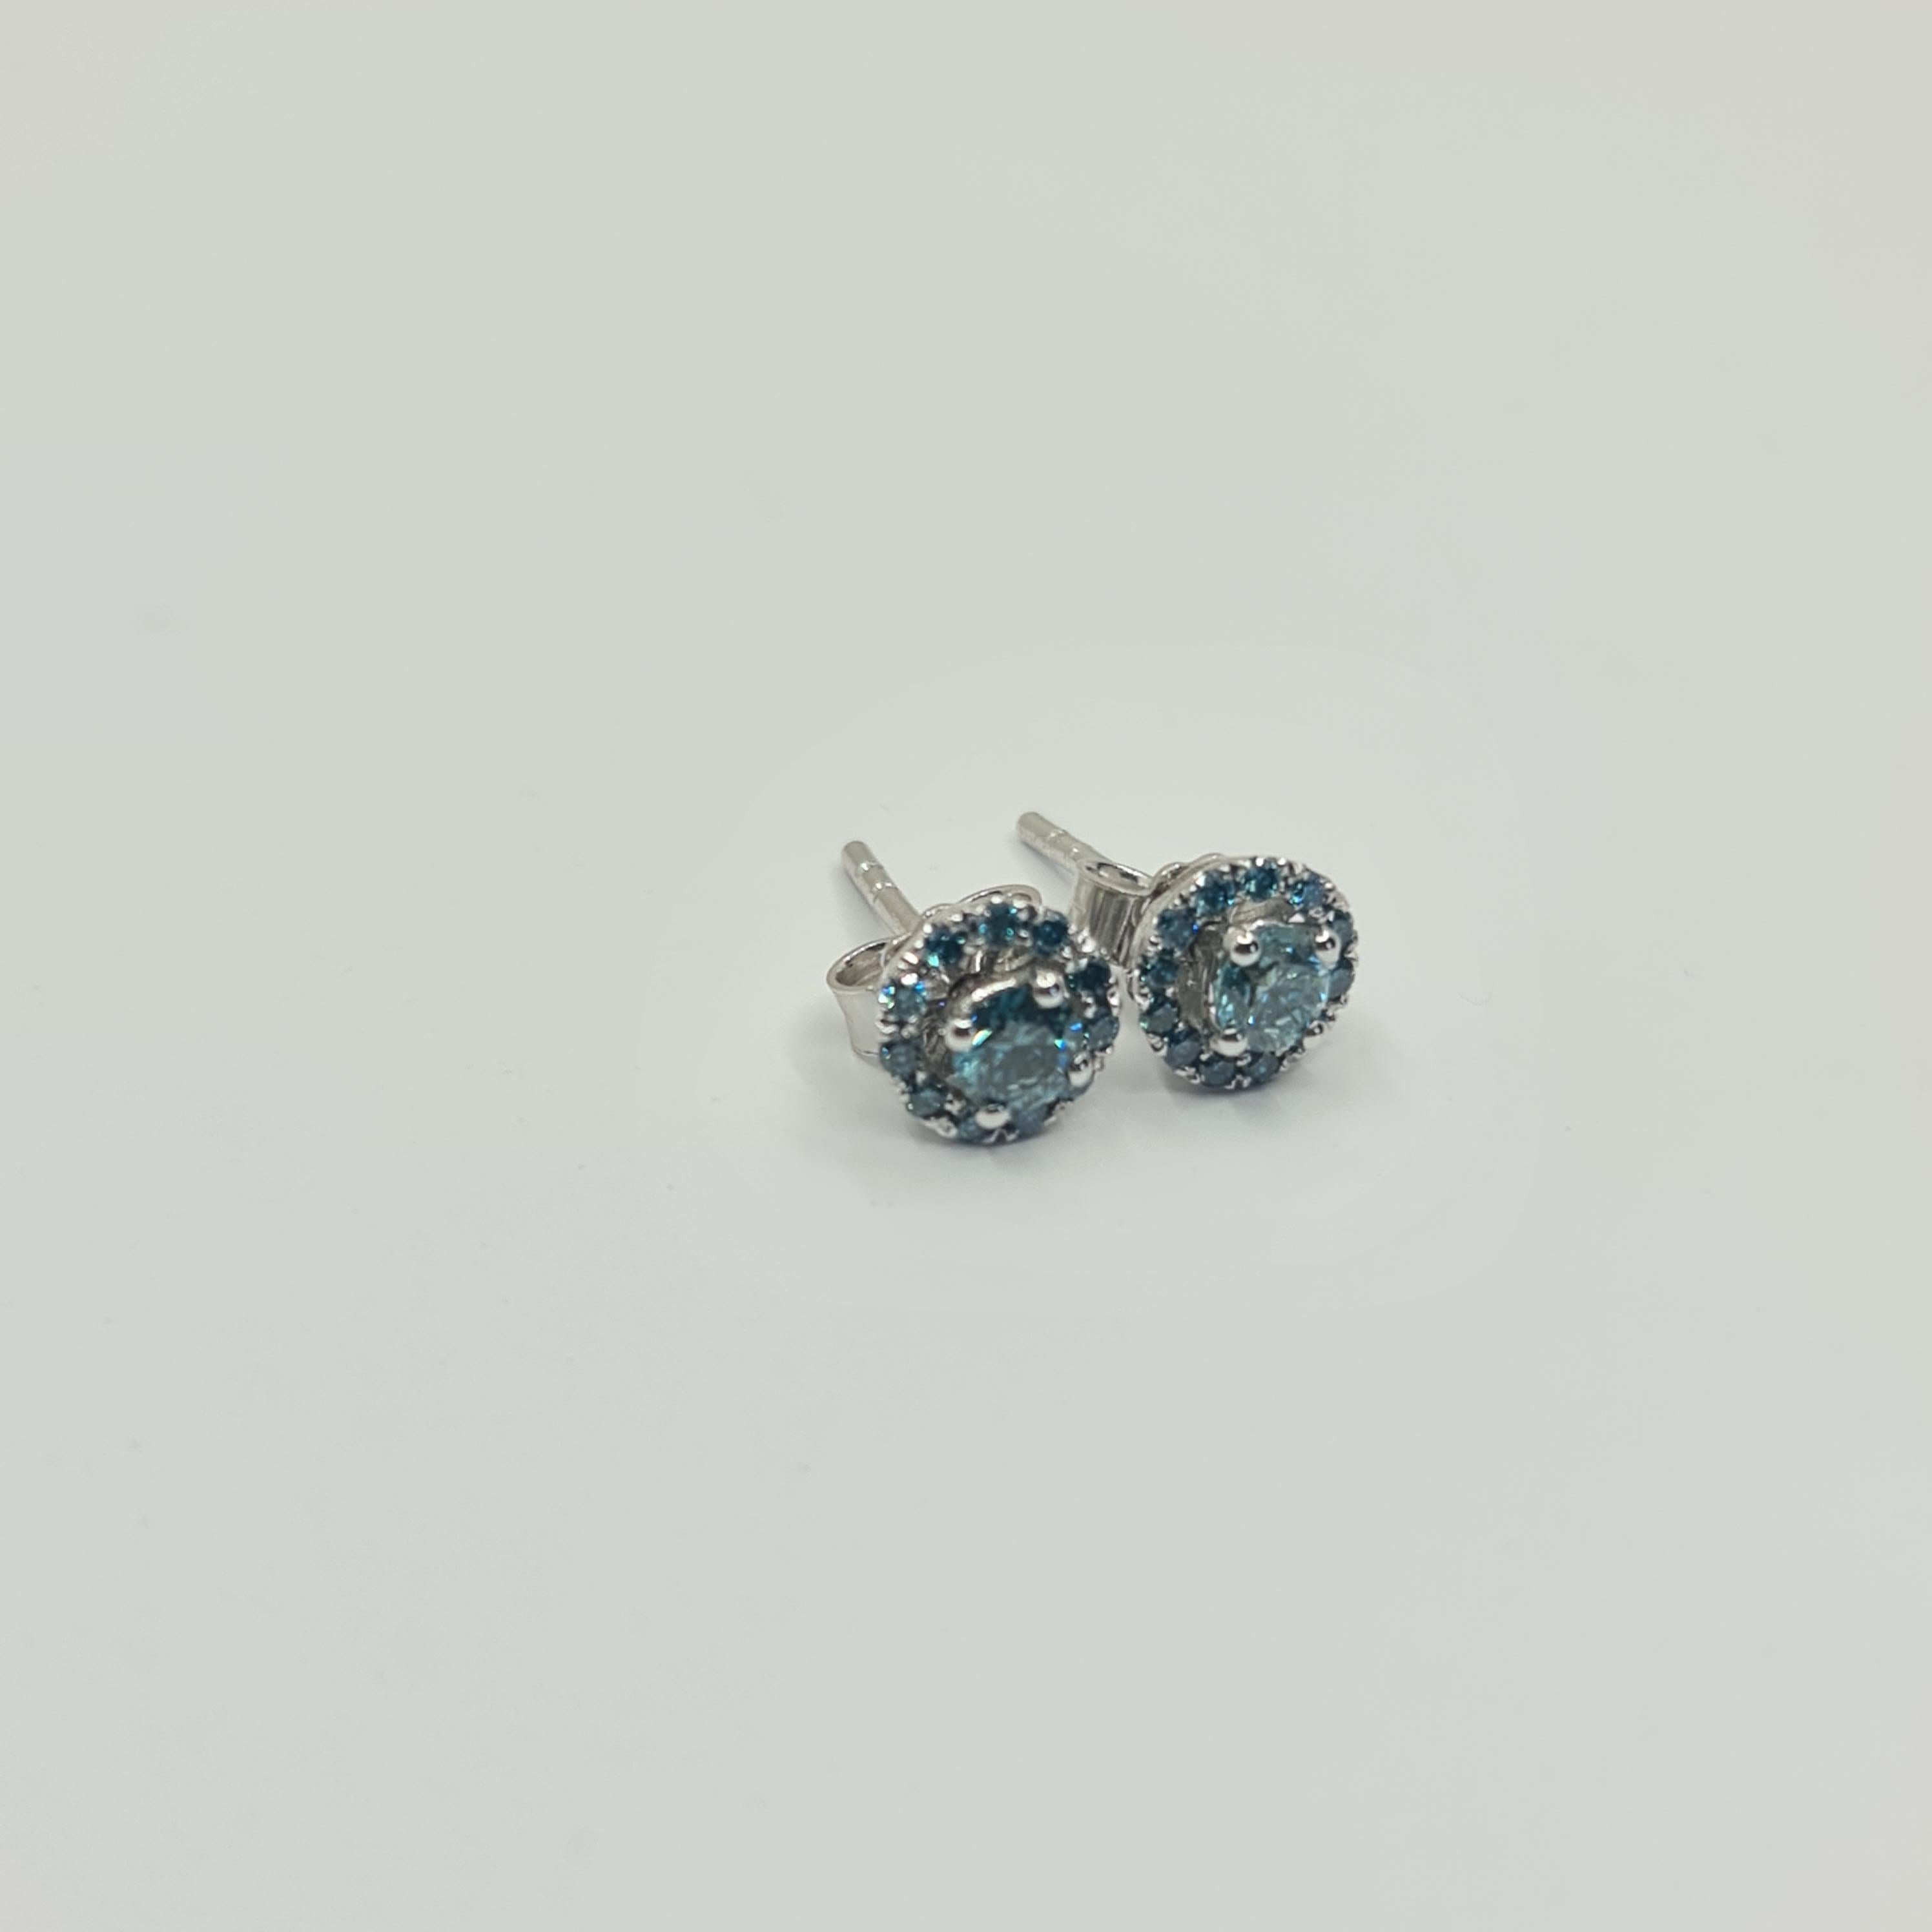 Exquisite GIA Certified Solitaire Diamond Studs 0.18/0.19 Carat Fancy Blue-Green For Sale 4